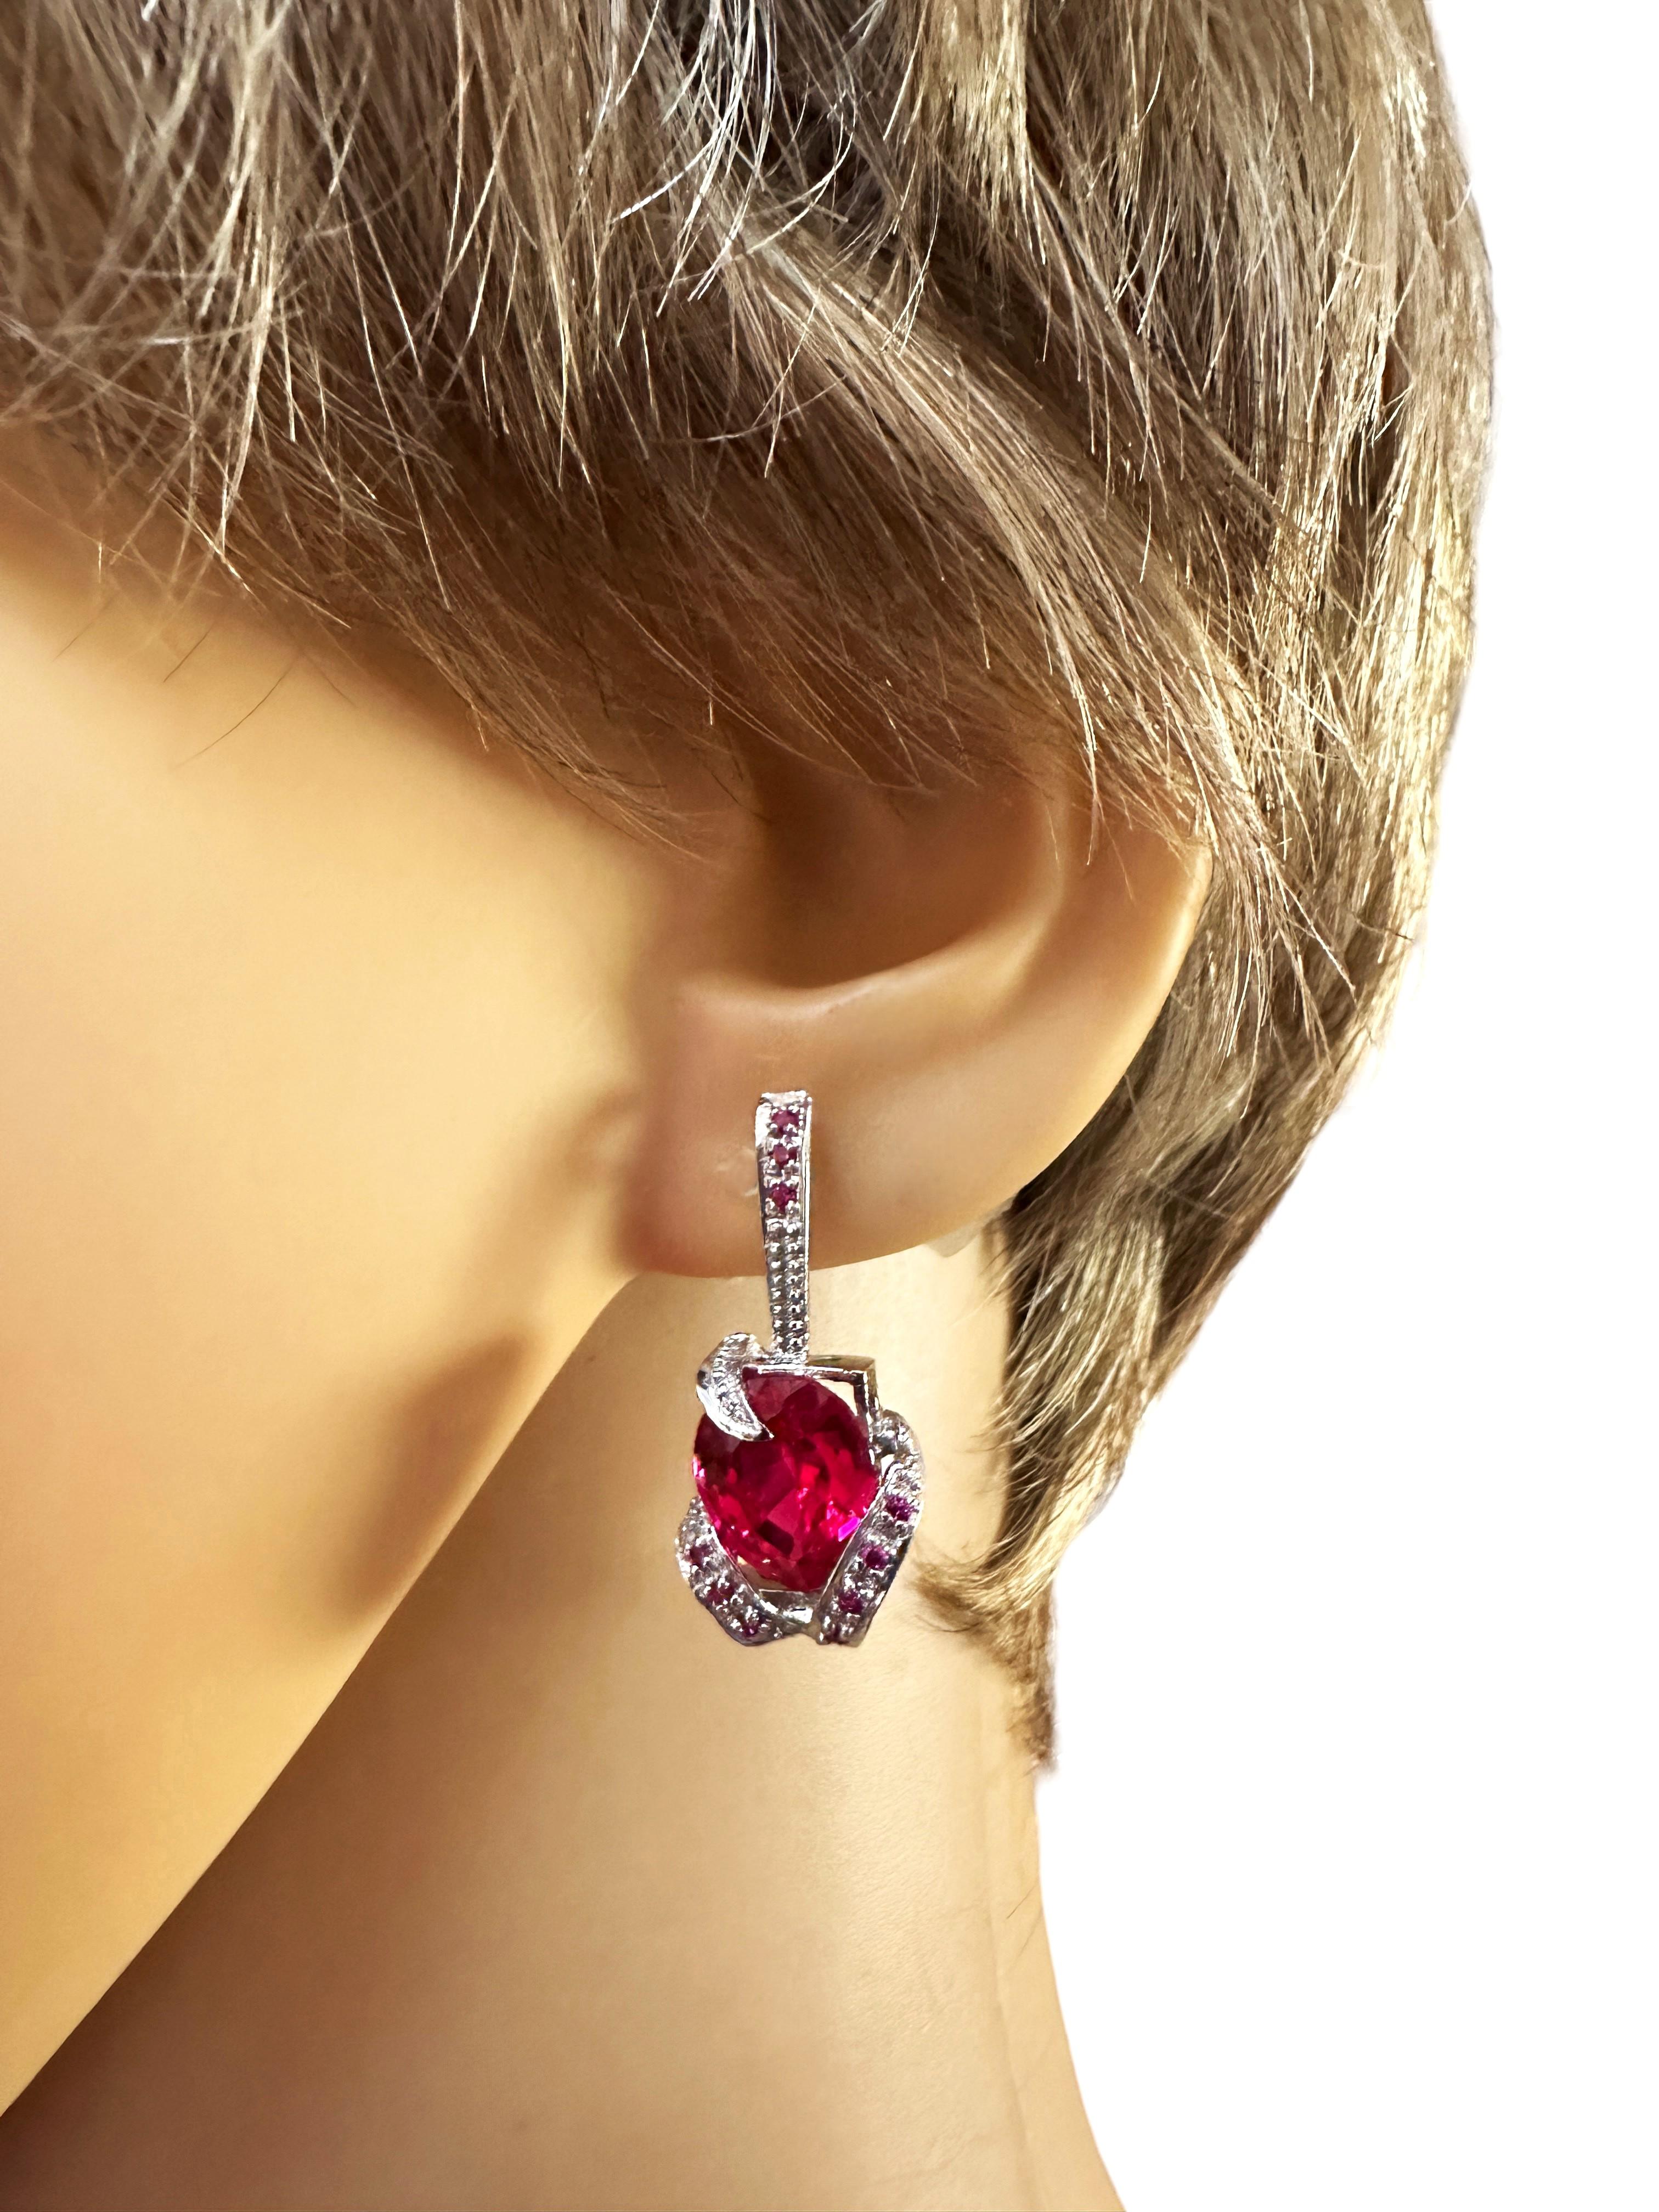 Art Deco New African 9.70 Ct Pinkish Red Sapphire Sterling Earrings